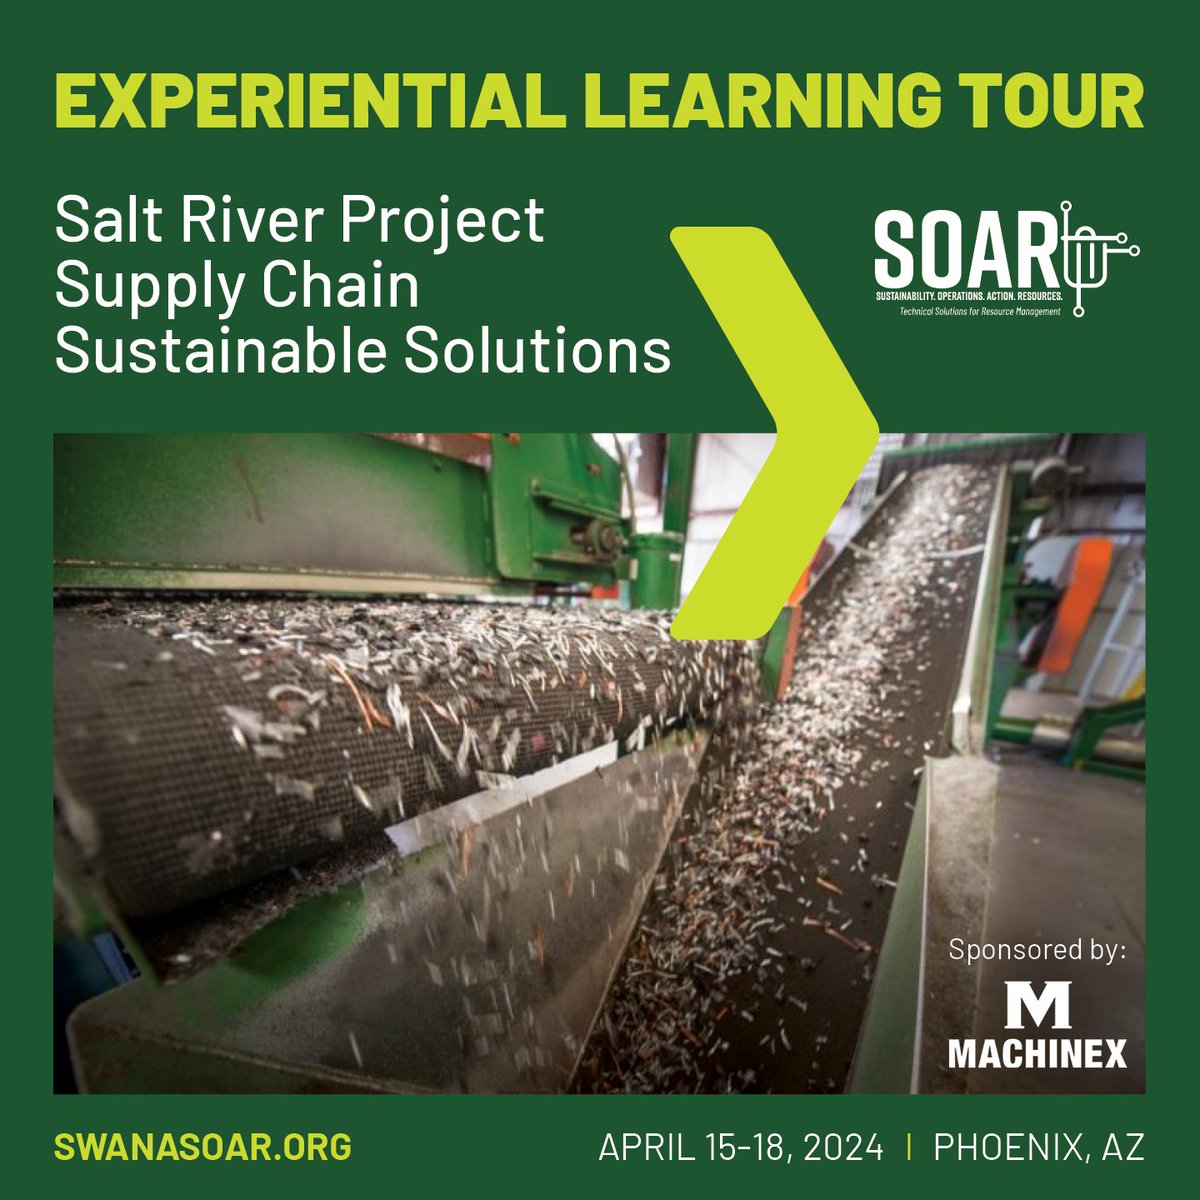 Sign up to tour the Salt River Project (SPR) Supply Chain Sustainable Solutions at SOAR 2024. The SRP is a community-based, not-for-profit Federal Reclamation project providing affordable water and power to more than 2 million people in central Arizona. swana.swoogo.com/soar2024/sessi….…